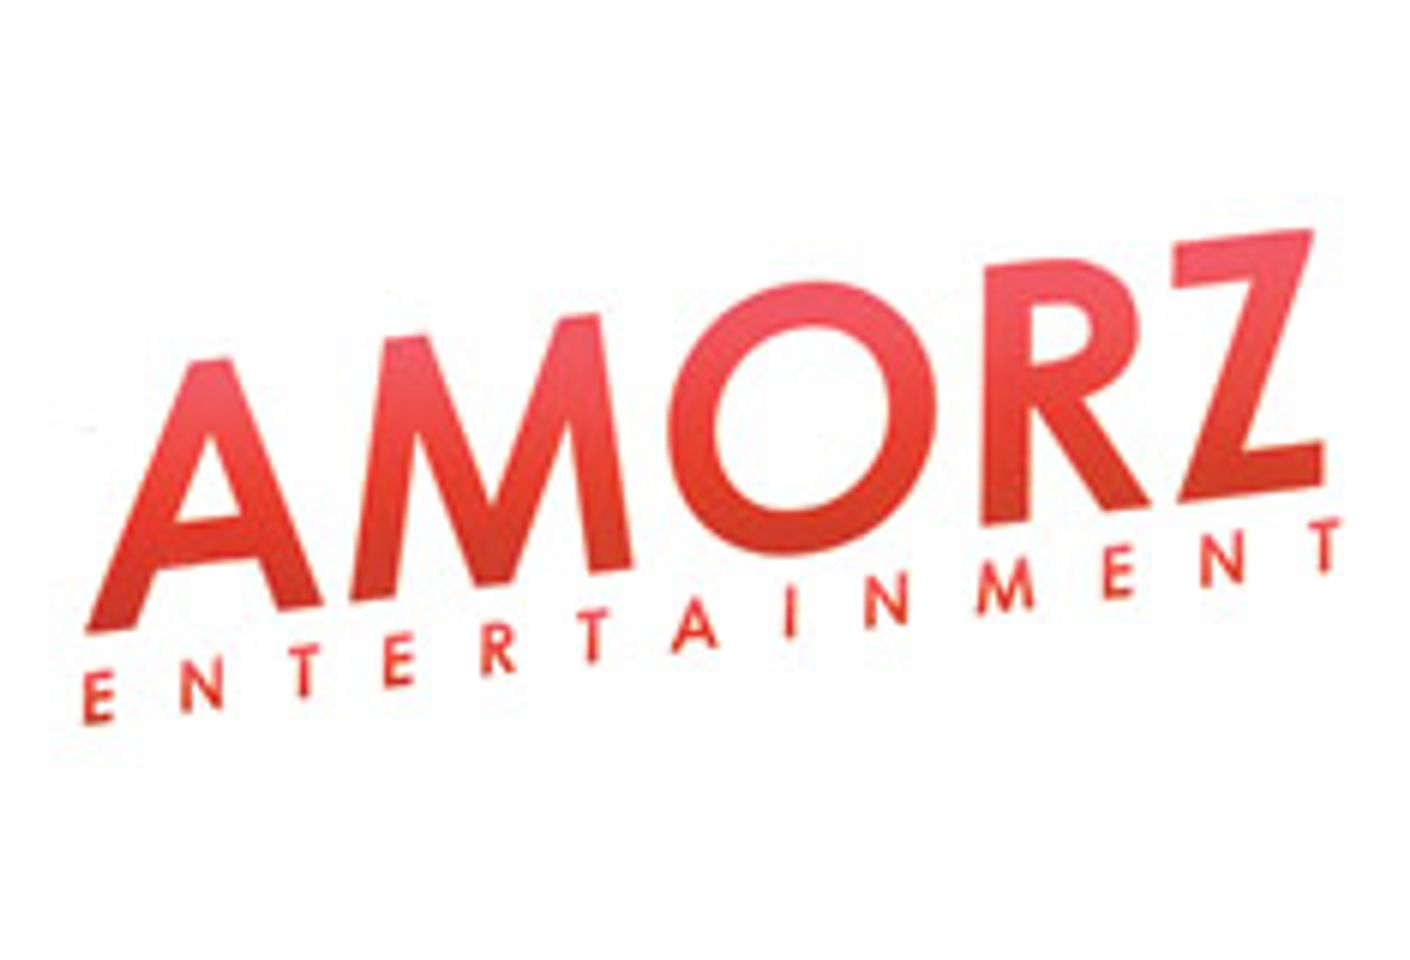 Amorz Launches Asian Hardcore Line Animated Series Avn